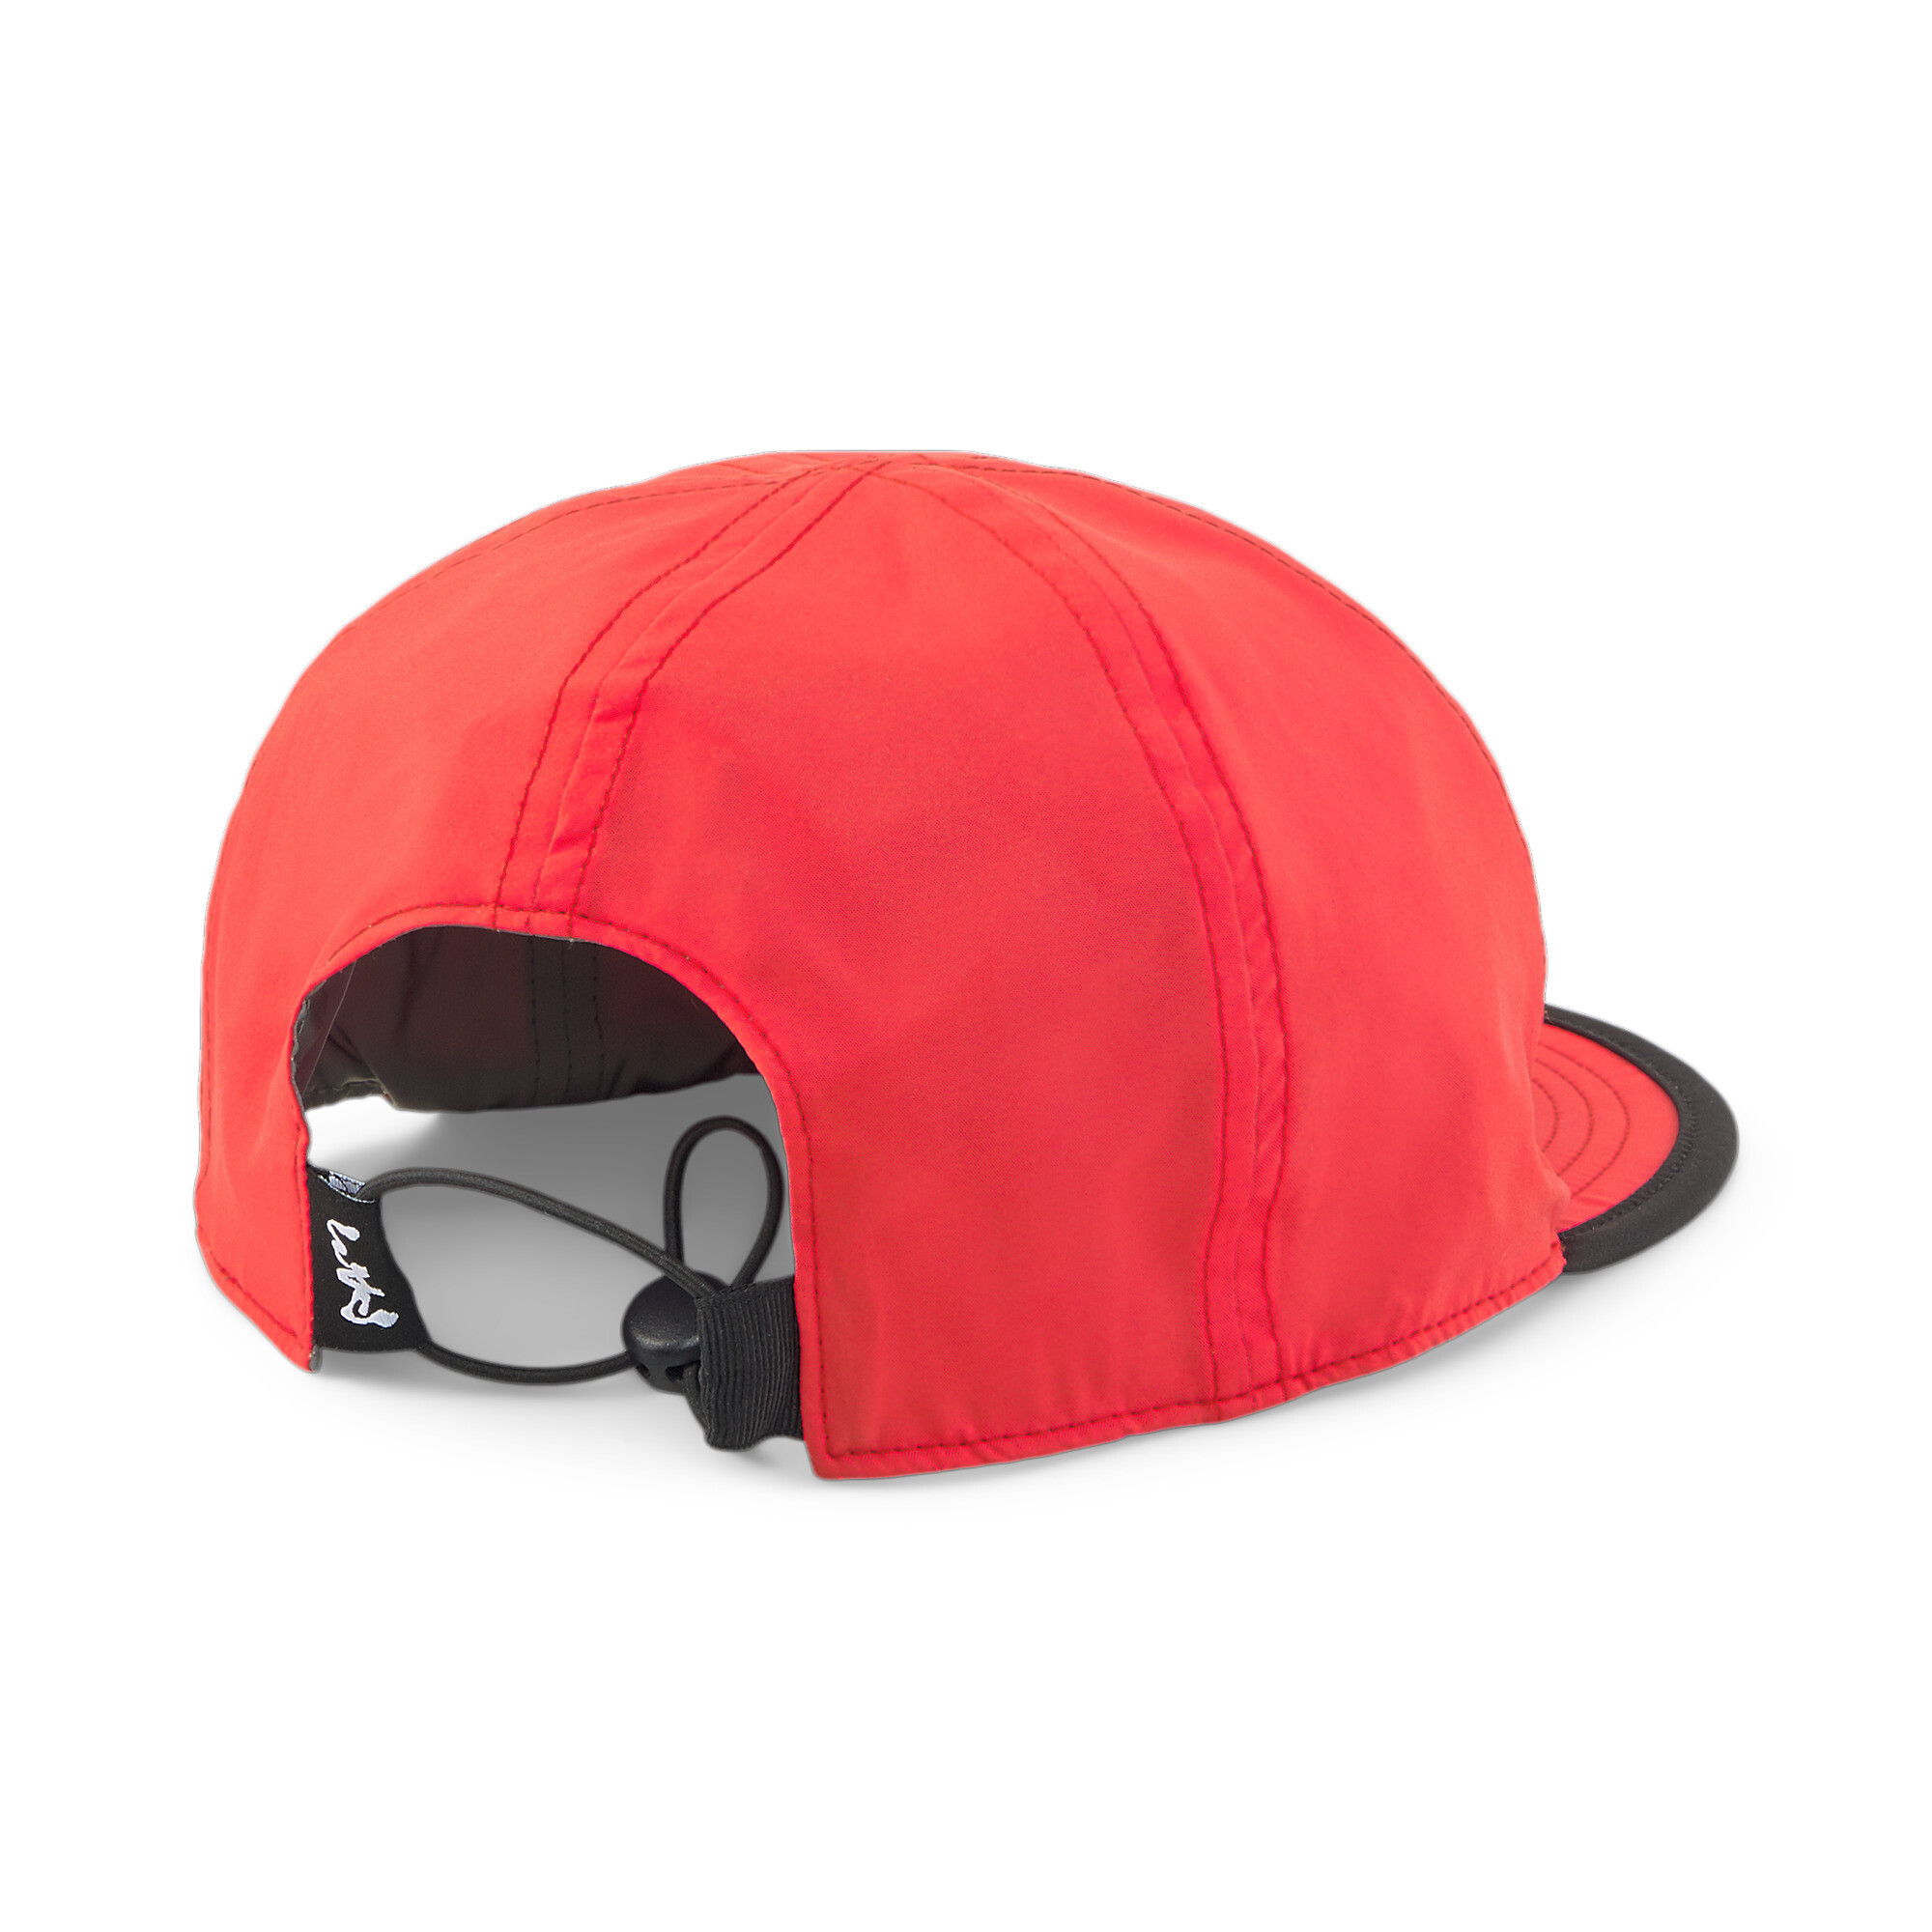 Puma X PERKS AND MINI Reversible Cap, Red, Size Adult, Accessories